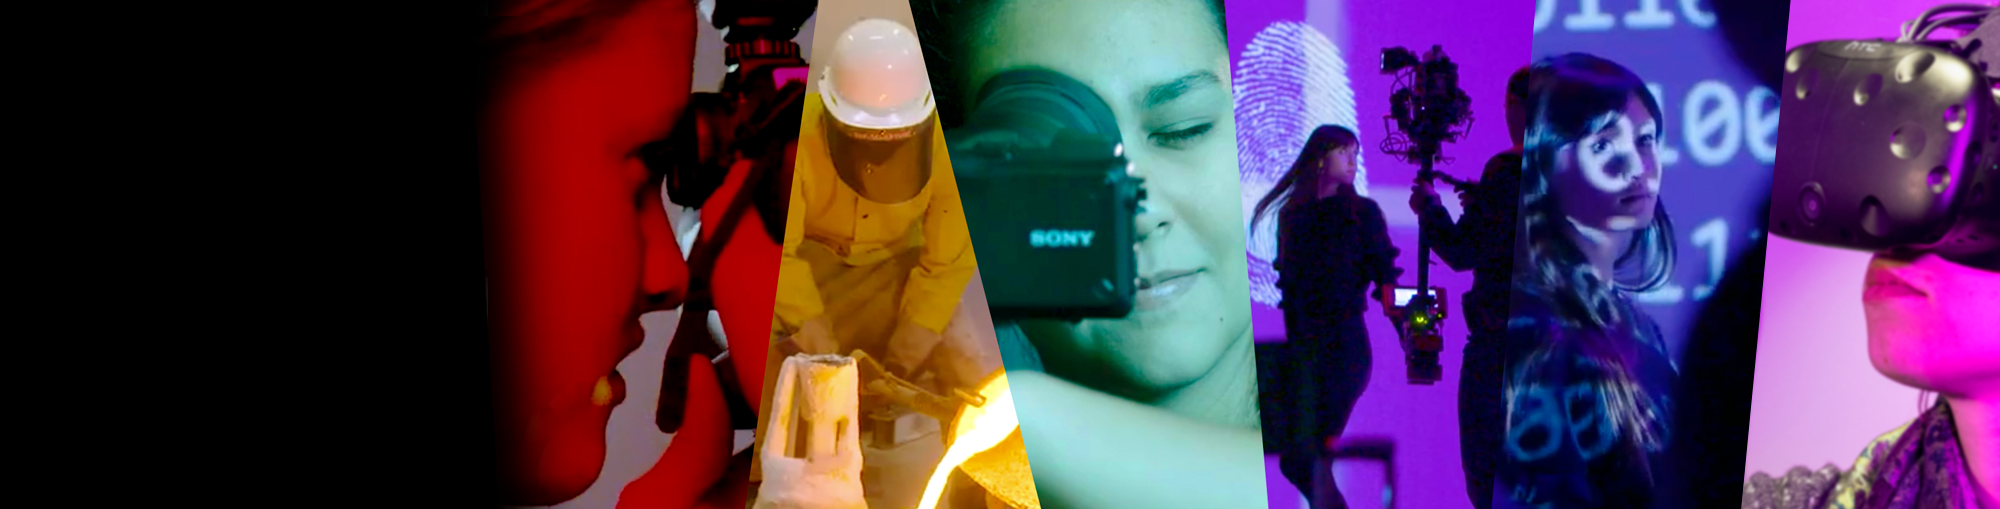 Collage of RIT students with colorful filters. There are three students using cameras, a student pouring molten metal, a student cast in a projection of binary code, and a student wearing a VR headset.